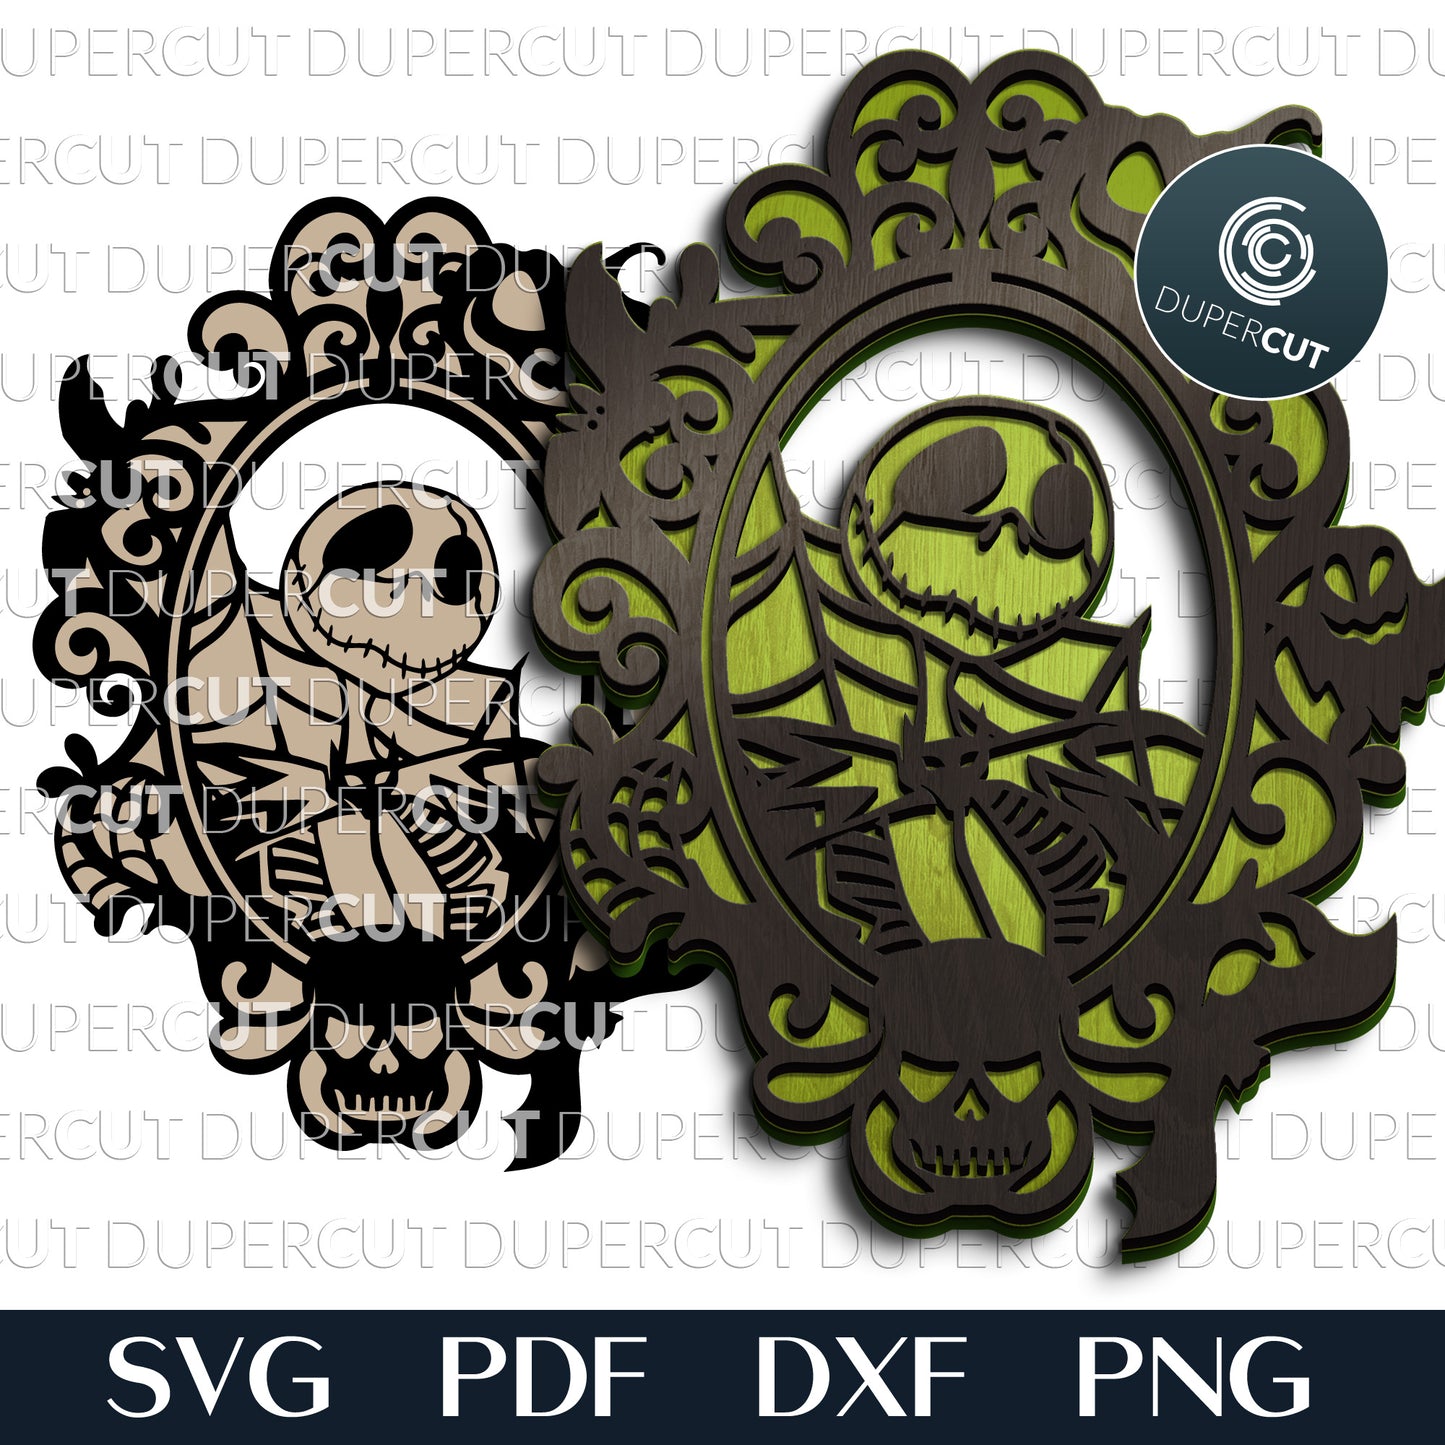 Jack Halloween door hanger layered designs for laser cutting machines. SVG PDF DXF vector files for Glowforge, Cricut, Silhouette, CNC plasma machines